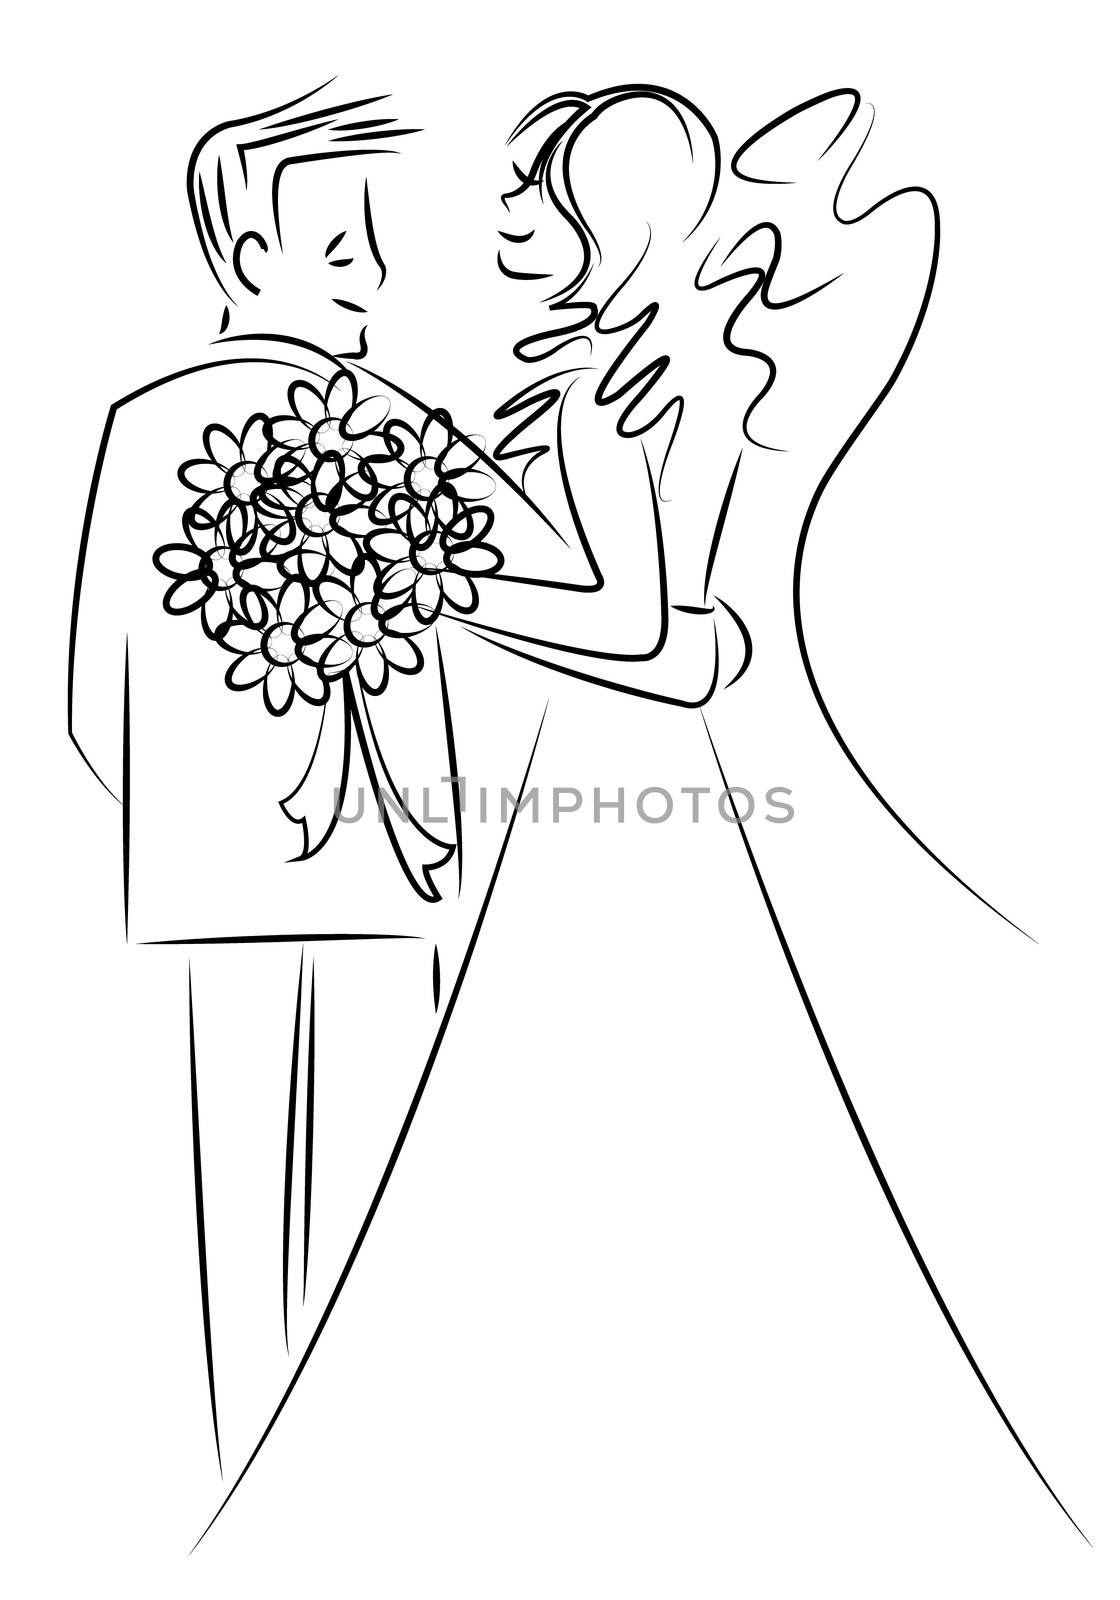 just married couple dancing, cartoon vector by Dr.G